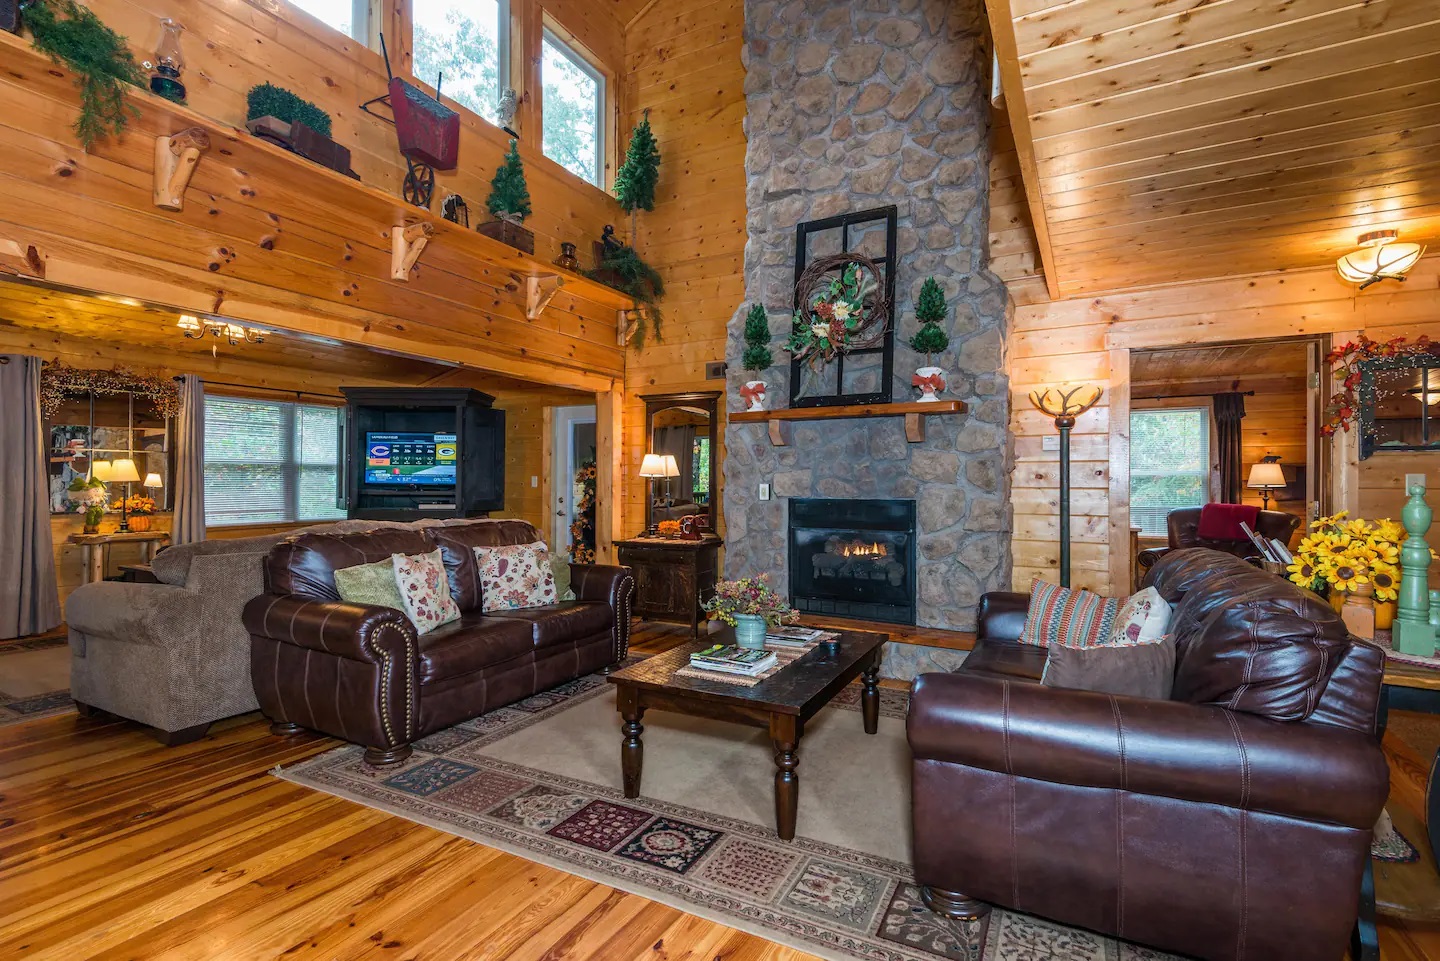 Fairytale Log Cabin living room with two couches and fireplace